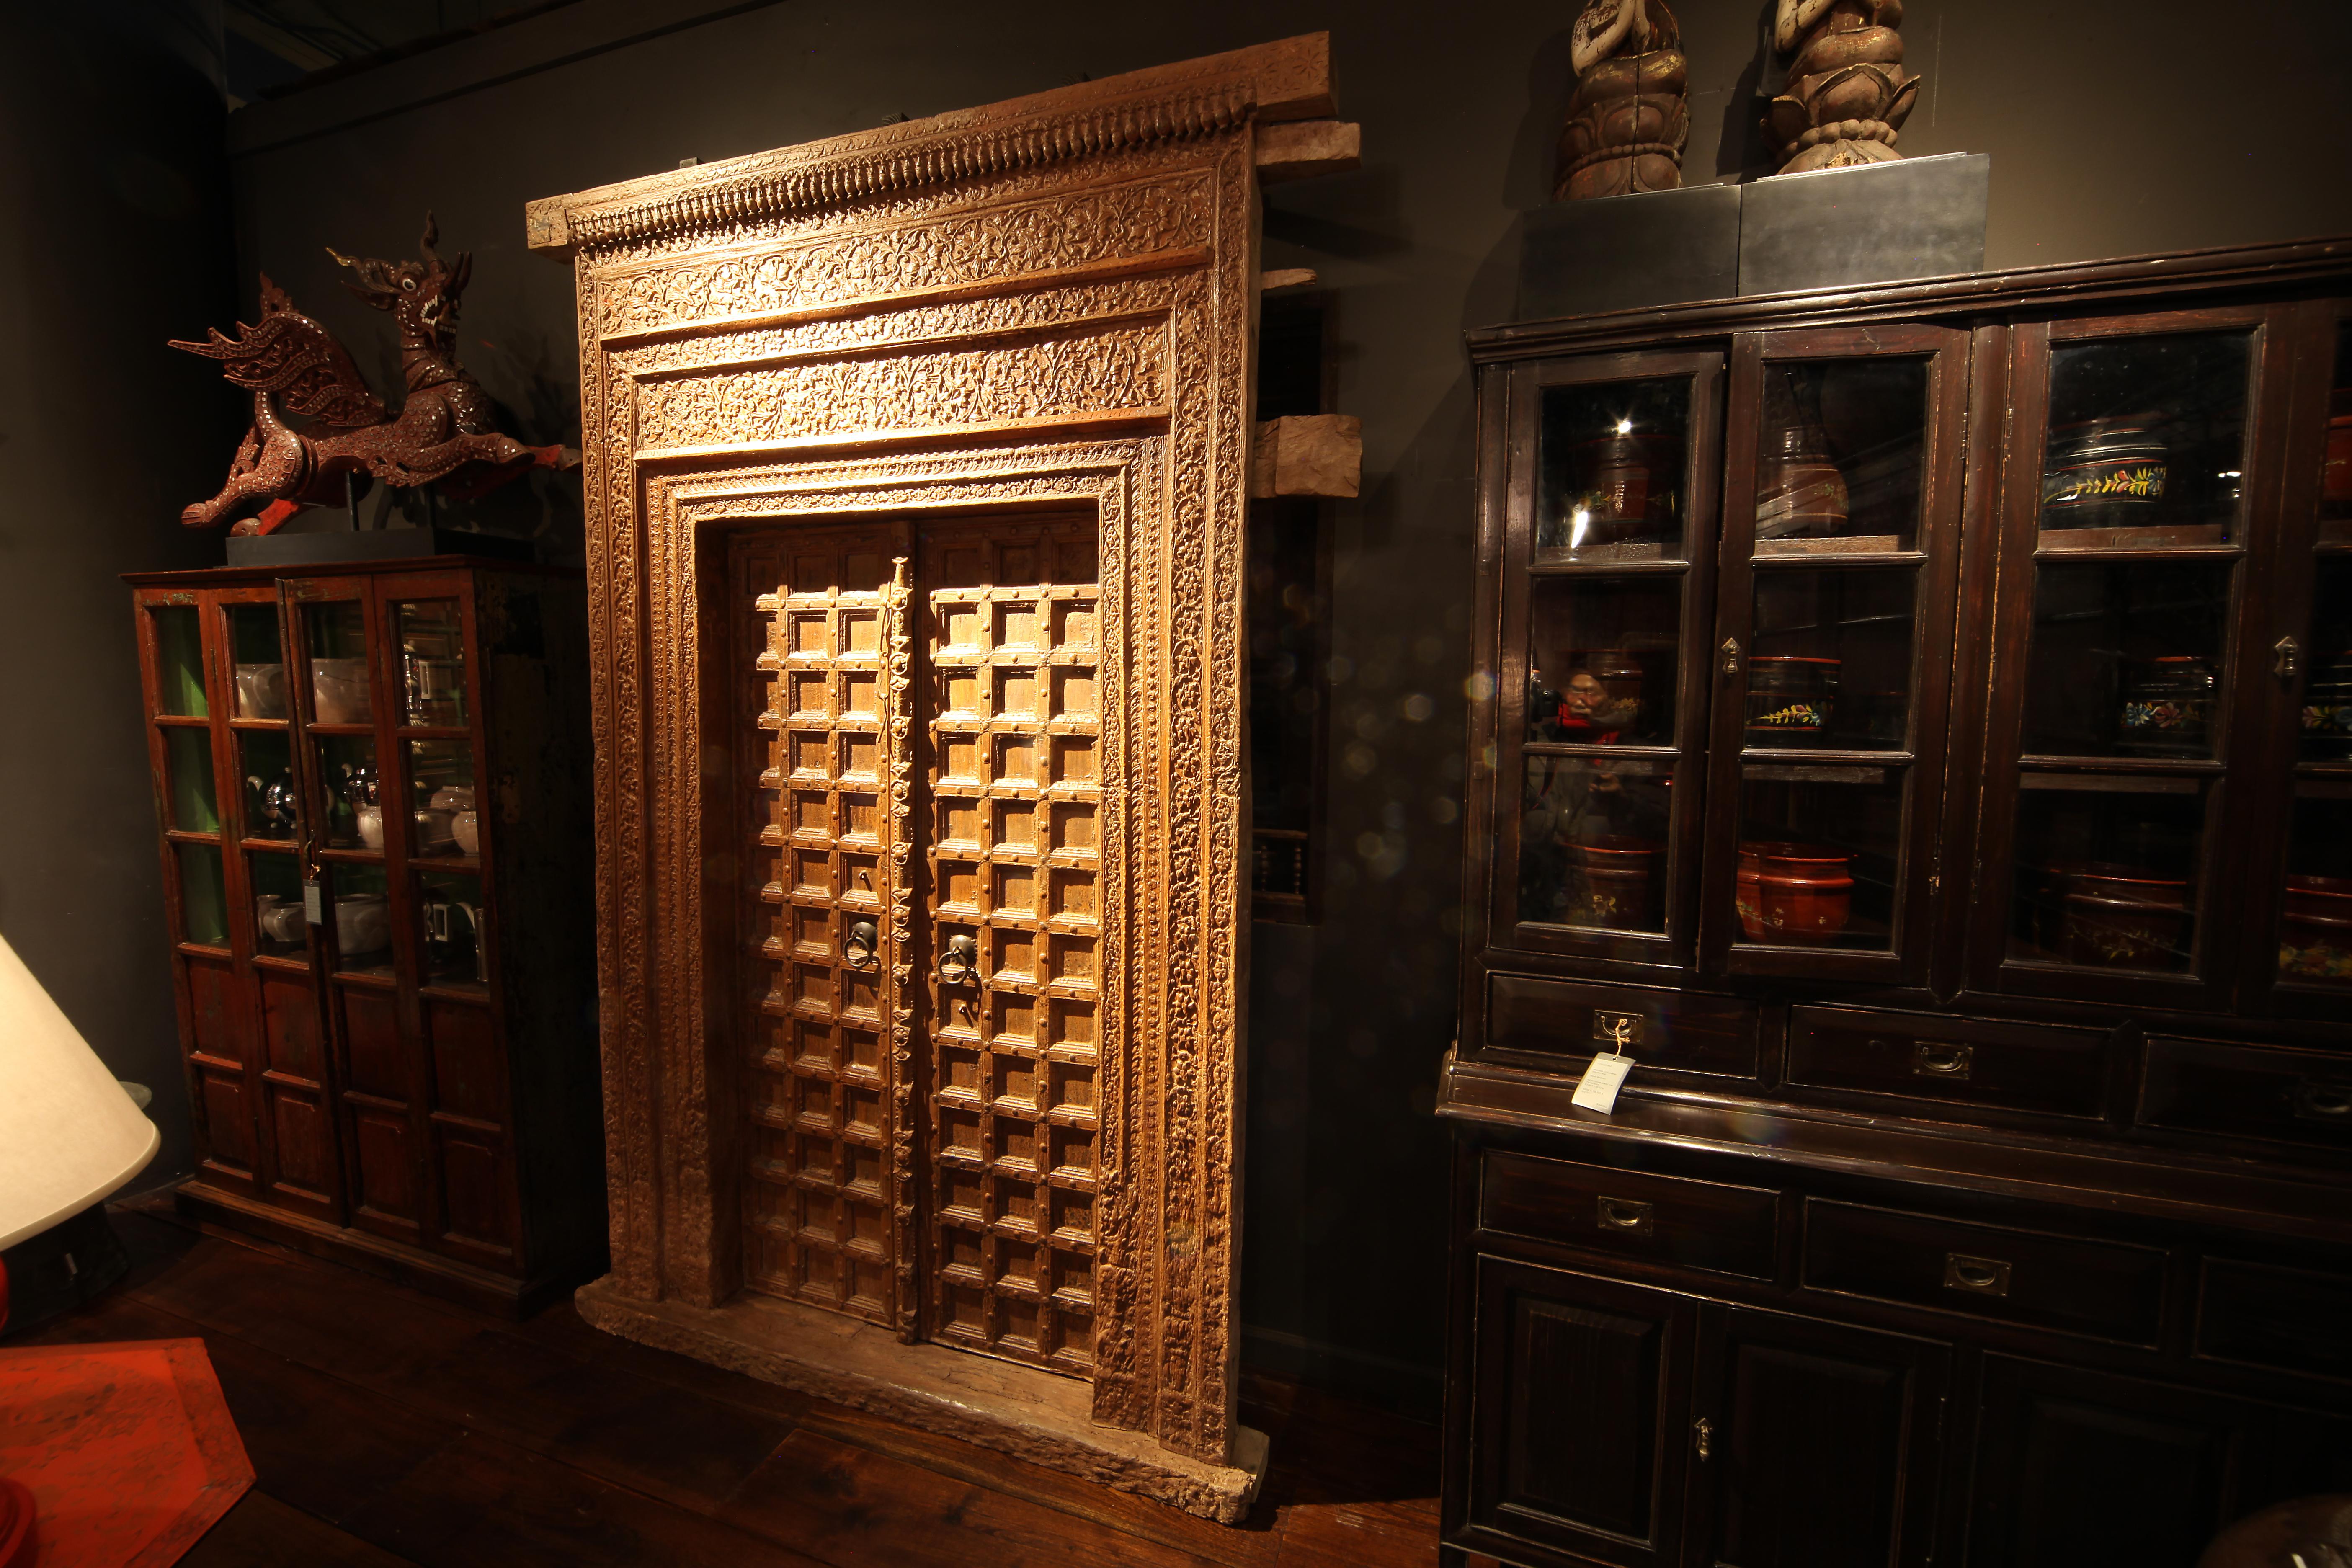 This monumental carved Indian entrance door is made from Chechum wood and features an impressive and intricate door frame. The frame members immediately adjacent to the doors are each carved from a large piece of wood delicately carved in a